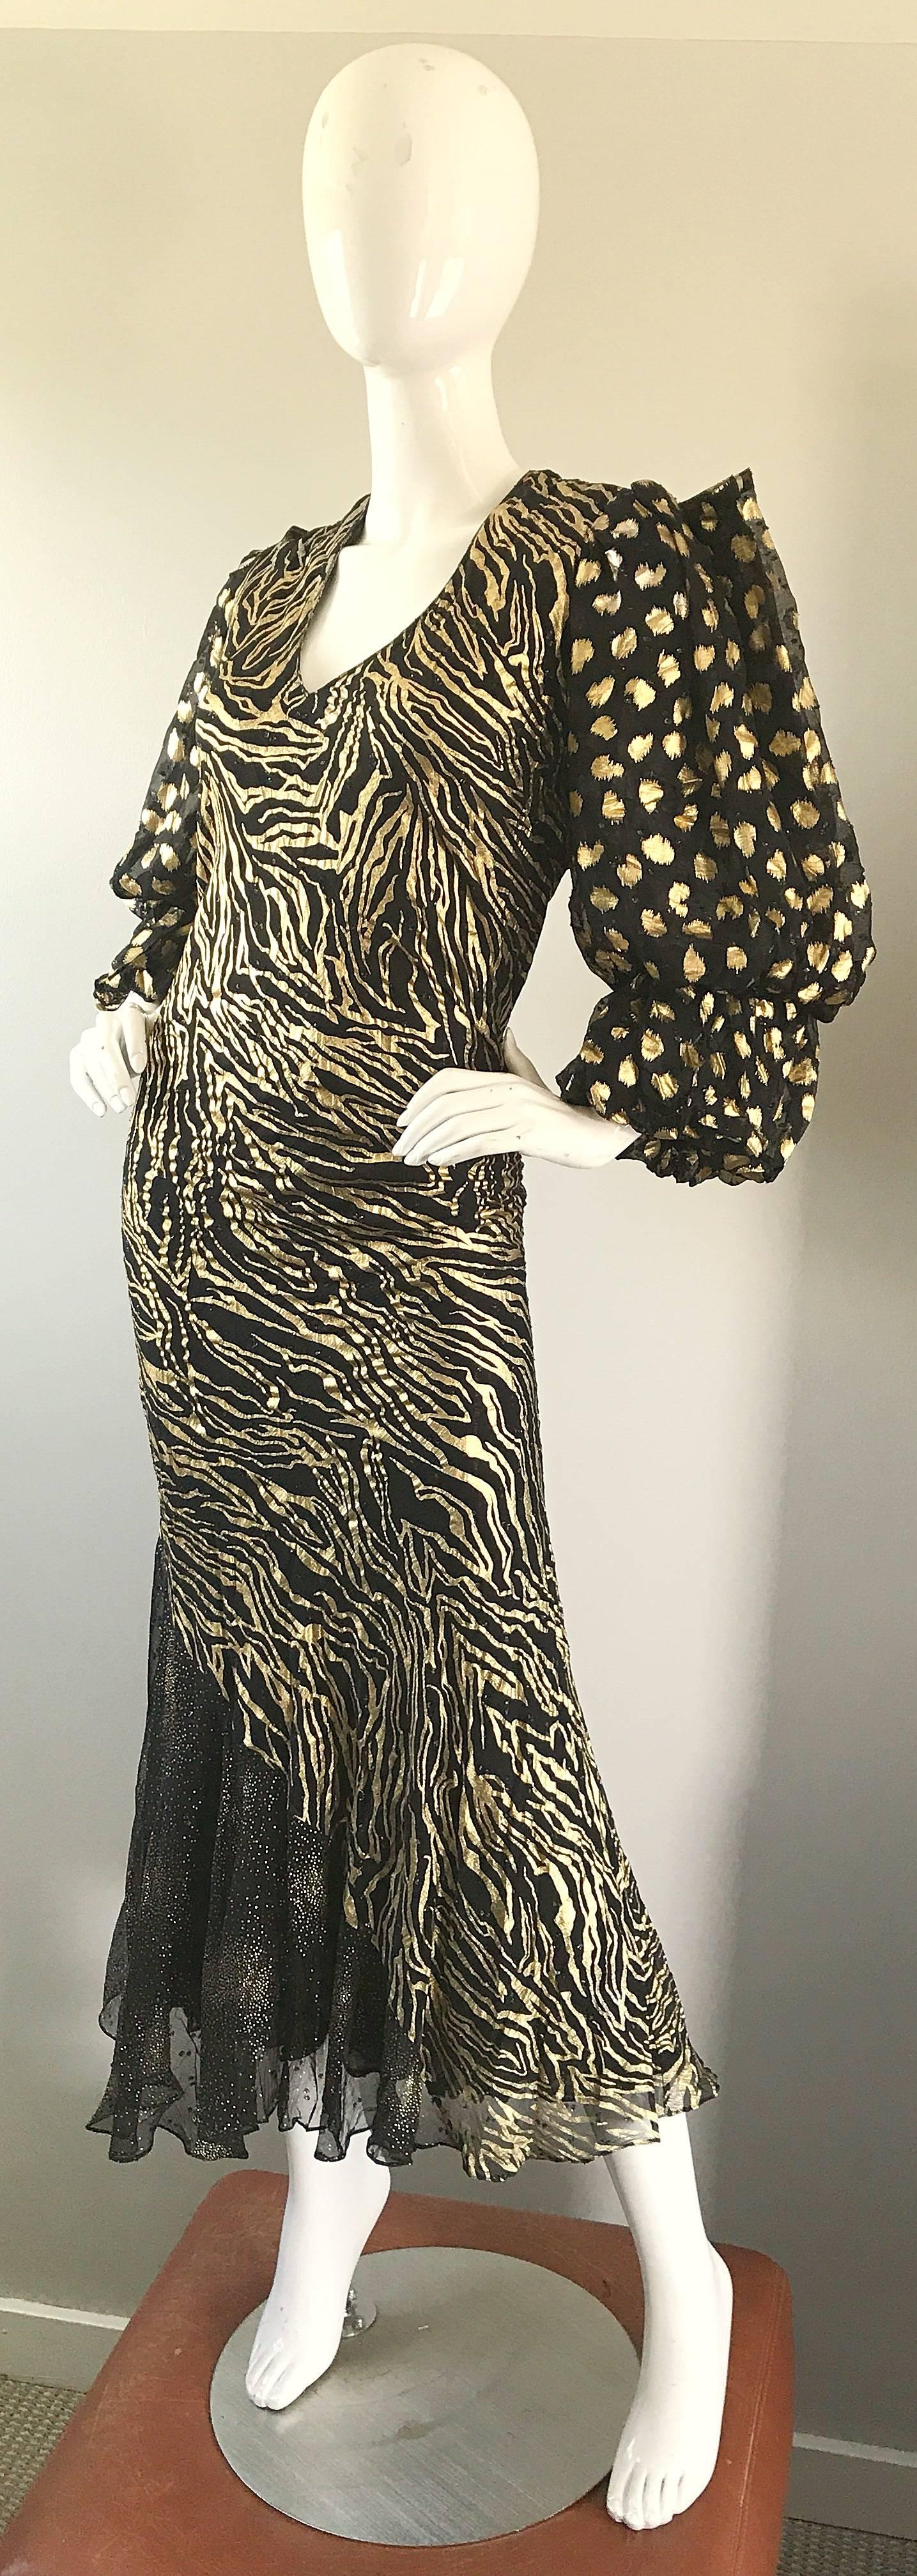 Women's Plus Size Vintage Judy Hornby Couture Hand Painted Gold Black Animal Print Dress